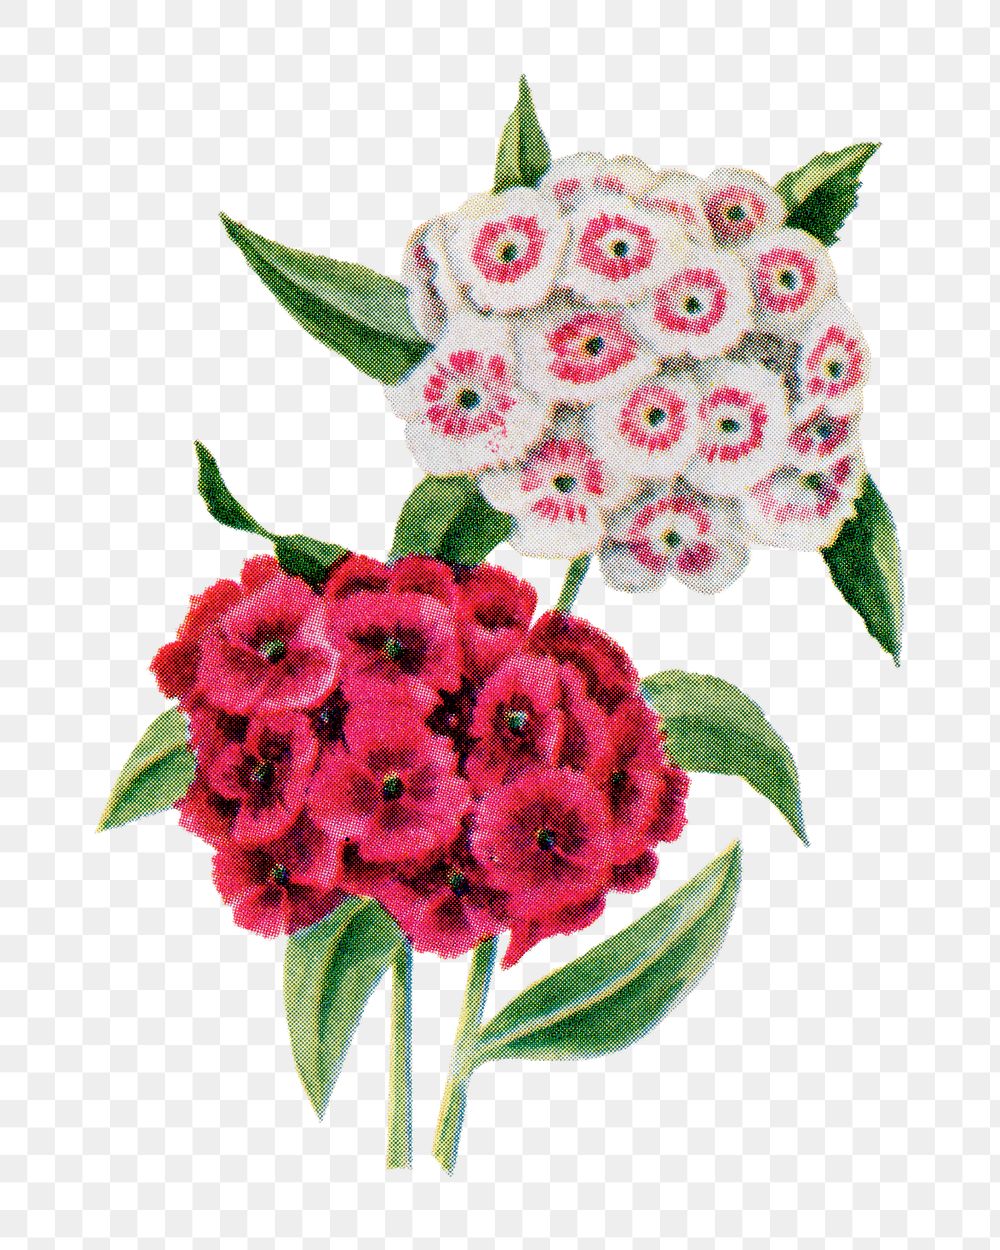 Sweet William flower png sticker, watercolor illustration, digitally enhanced from our own original copy of The Open Door to…